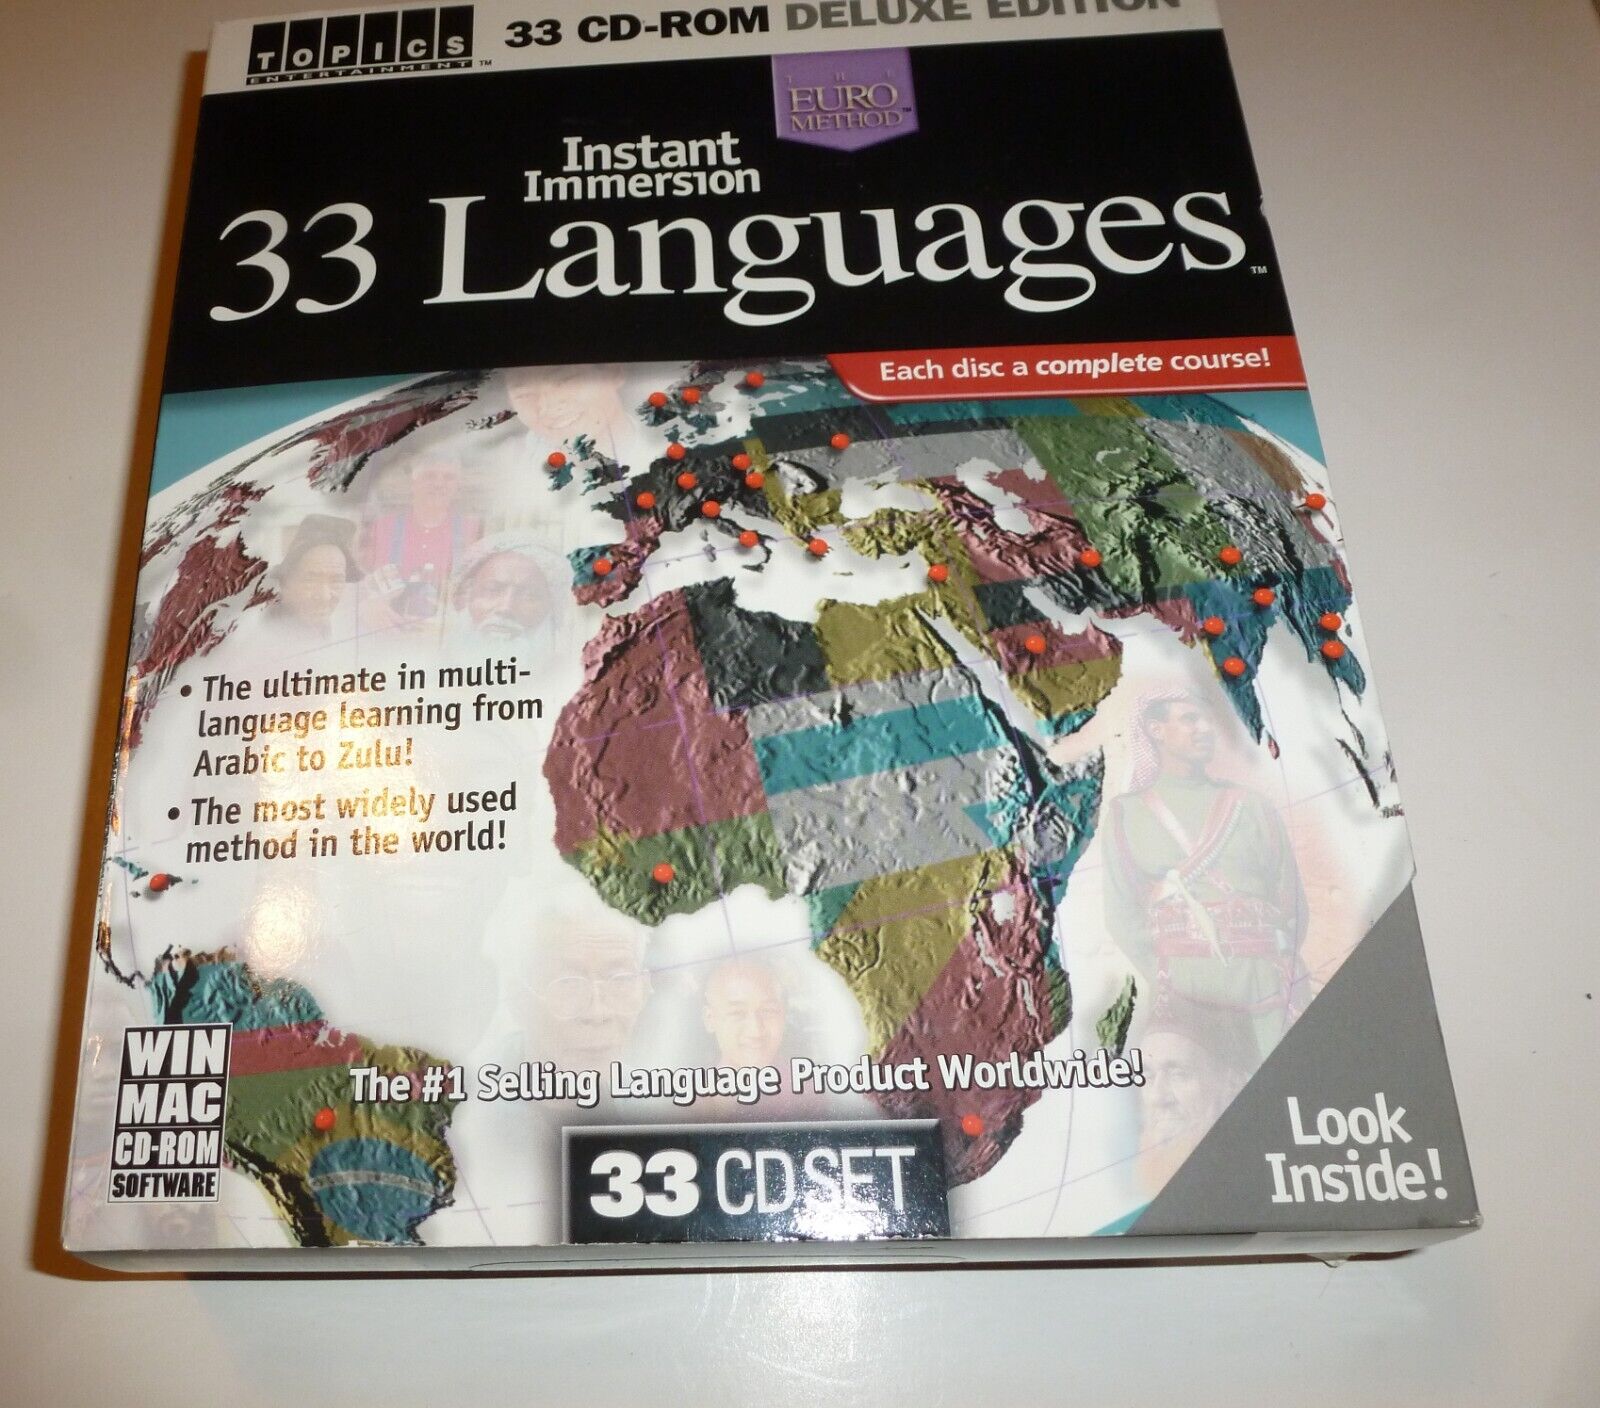 Instant Immersion 33 Languages Deluxe Edition the Euro Method. WIN MAC CD